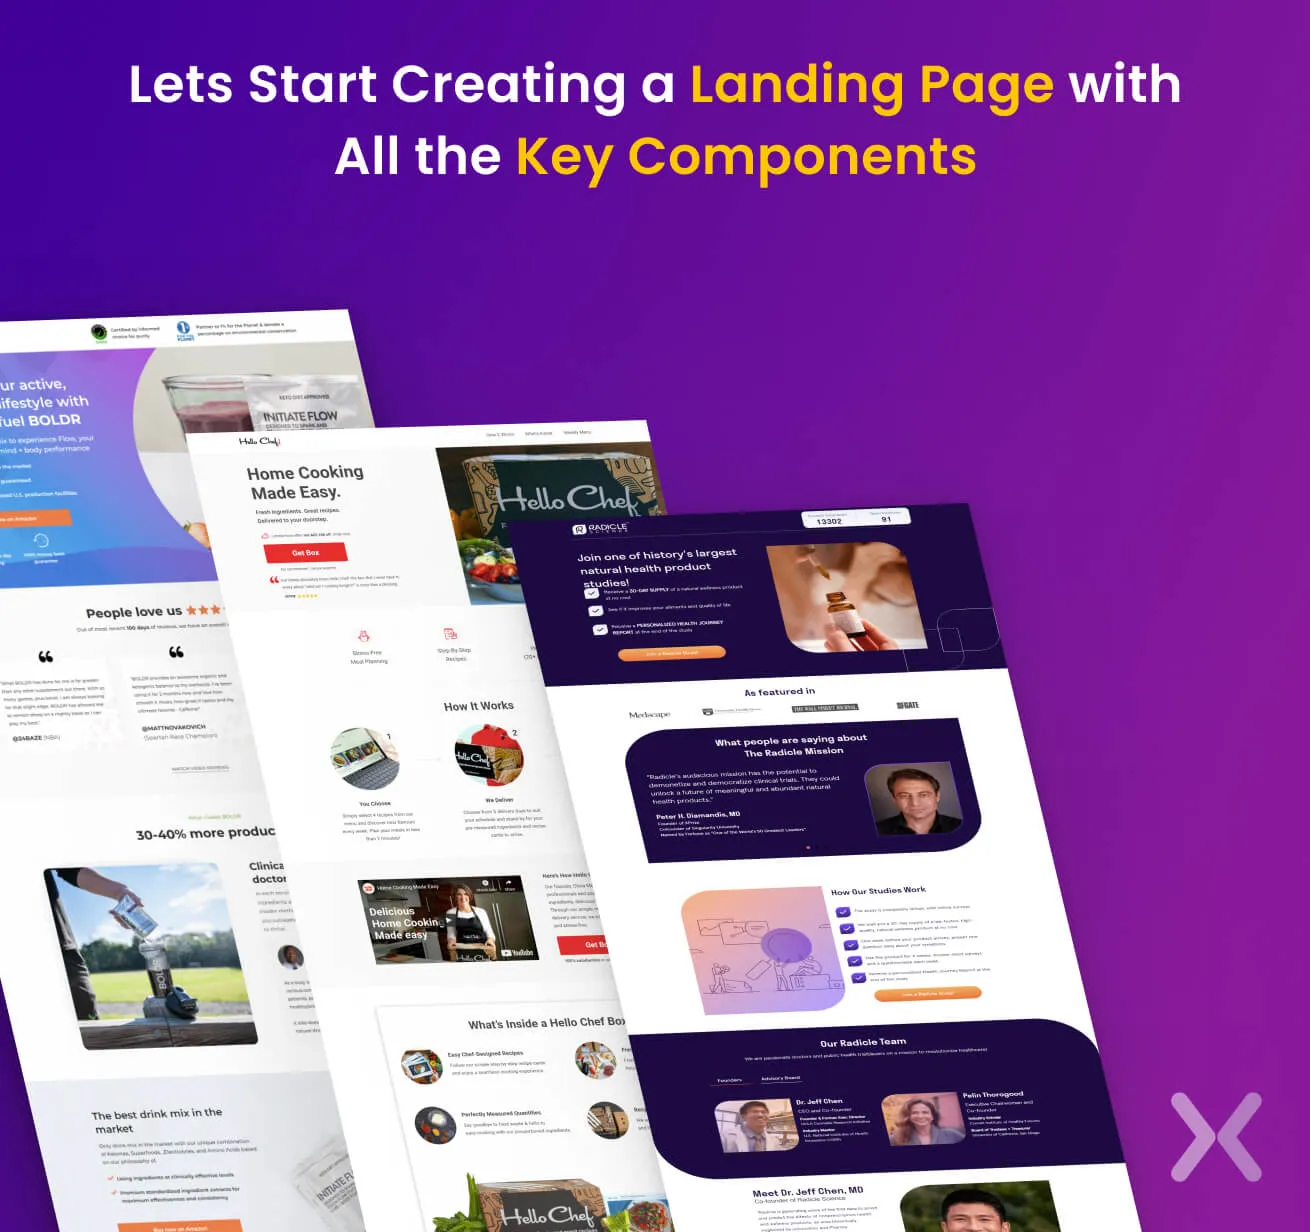 Components-Of-Landing-Page-image-16.webp